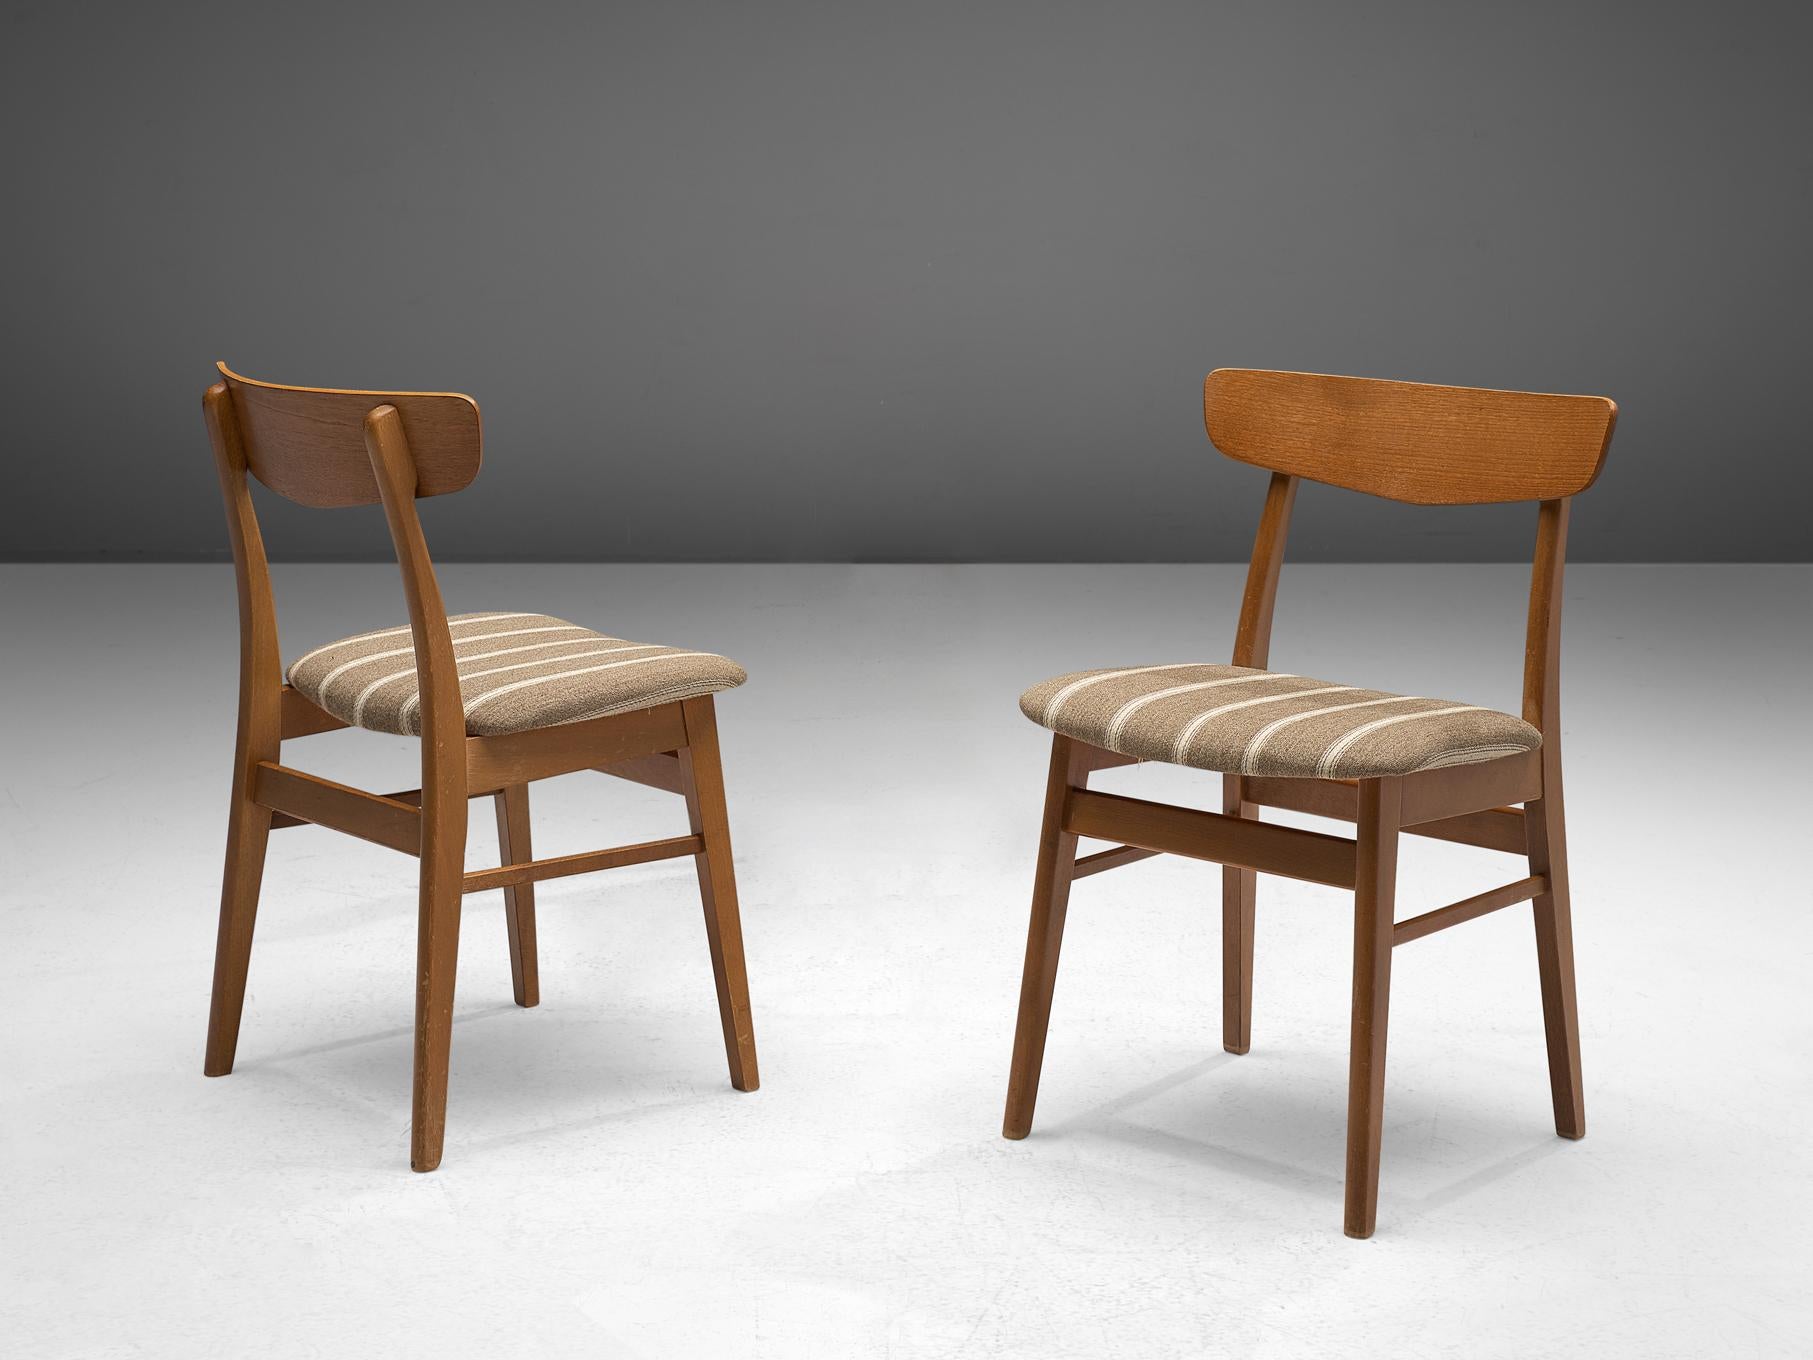 Dining chairs in teak, Denmark, 1960s

These well made Danish dining chairs have a convincing appearance and a construction typical for Danish style furniture in the 1960s, showing resemblance to the work of Hans J. Wegner. The design is